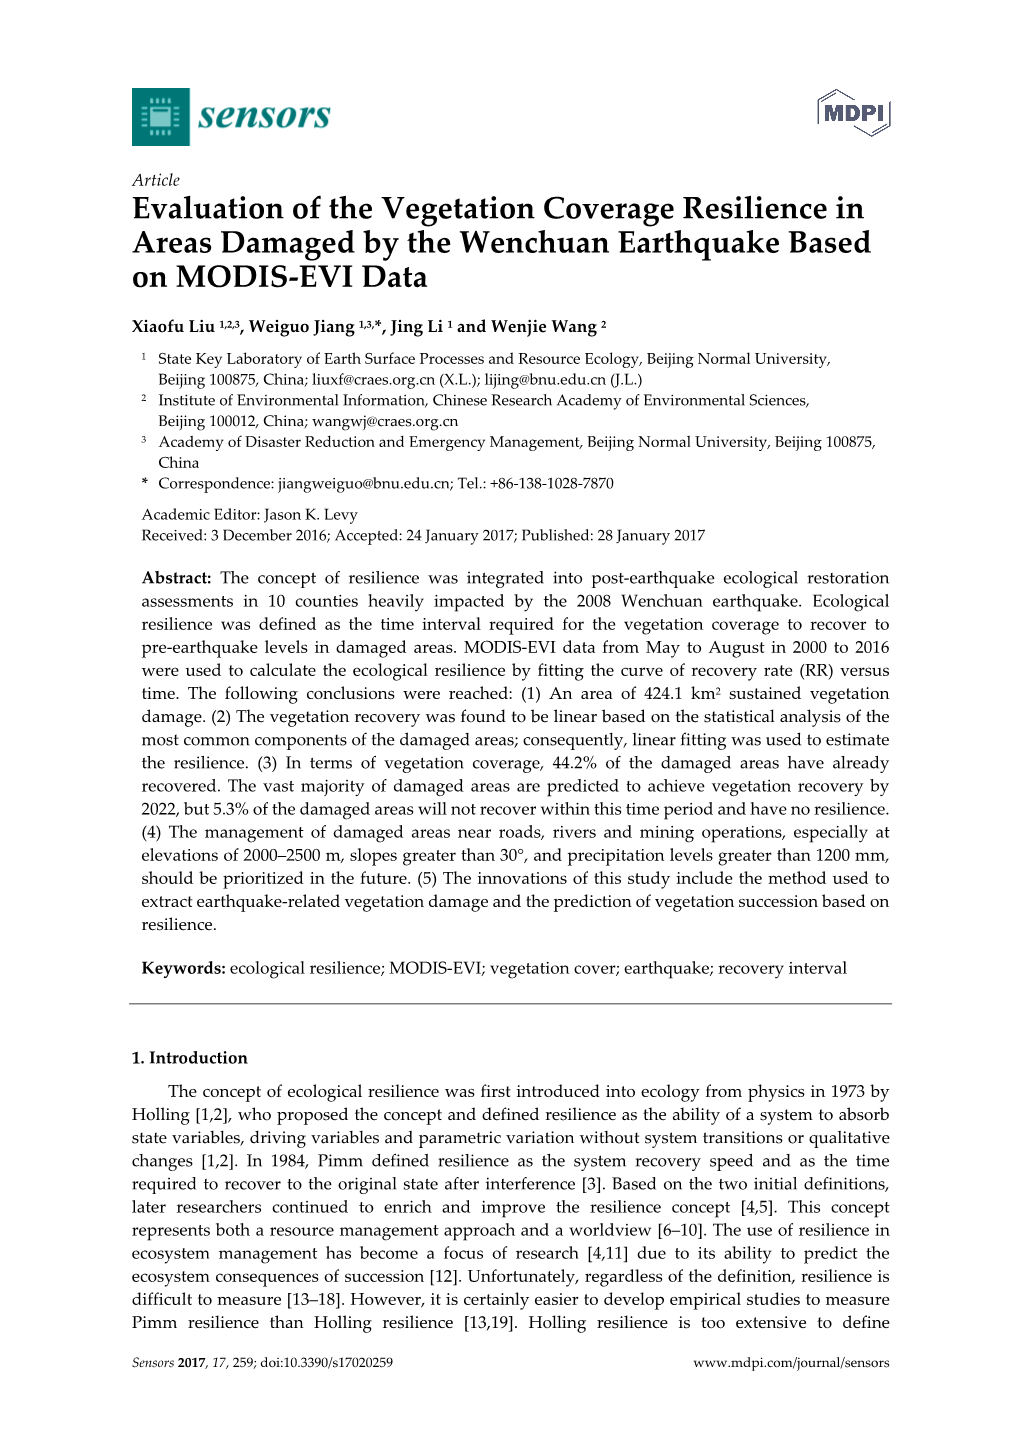 Evaluation of the Vegetation Coverage Resilience in Areas Damaged by the Wenchuan Earthquake Based on MODIS-EVI Data